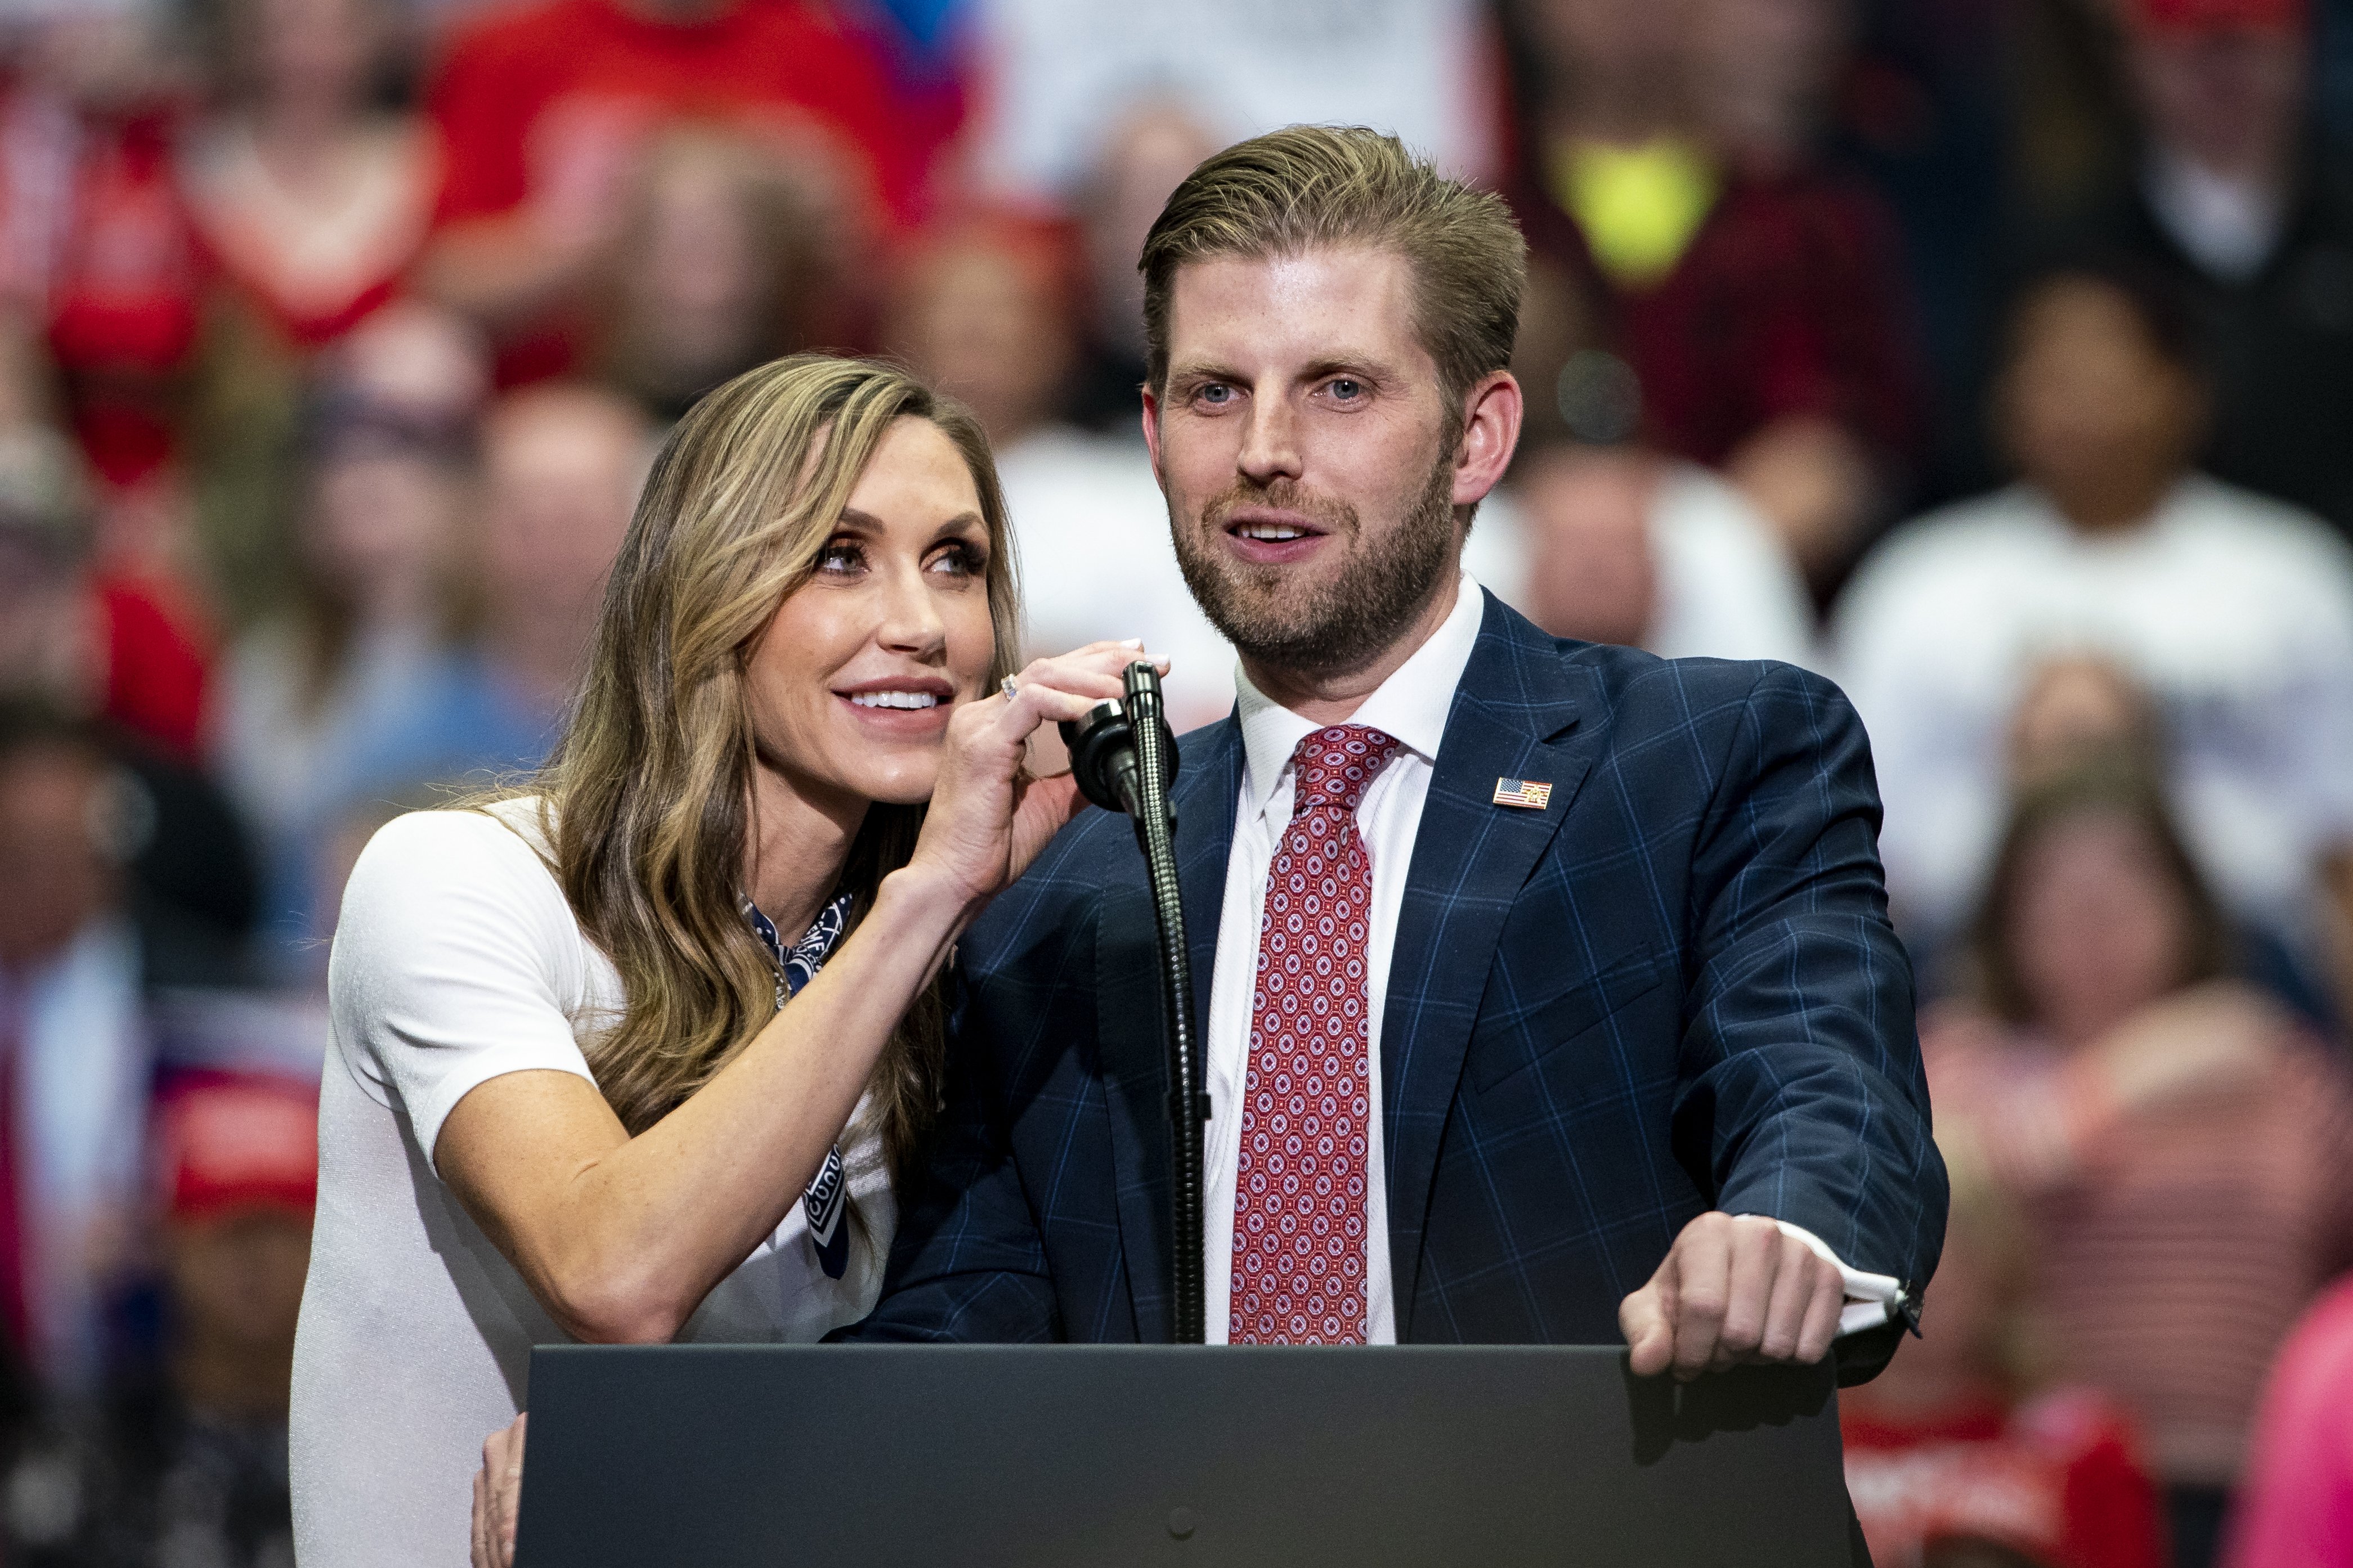 Lara Trump, and Eric Trump, during a rally with U.S. President Donald Trump in Charlotte, North Carolina, on March 2, 2020 | Photo: GettyImages